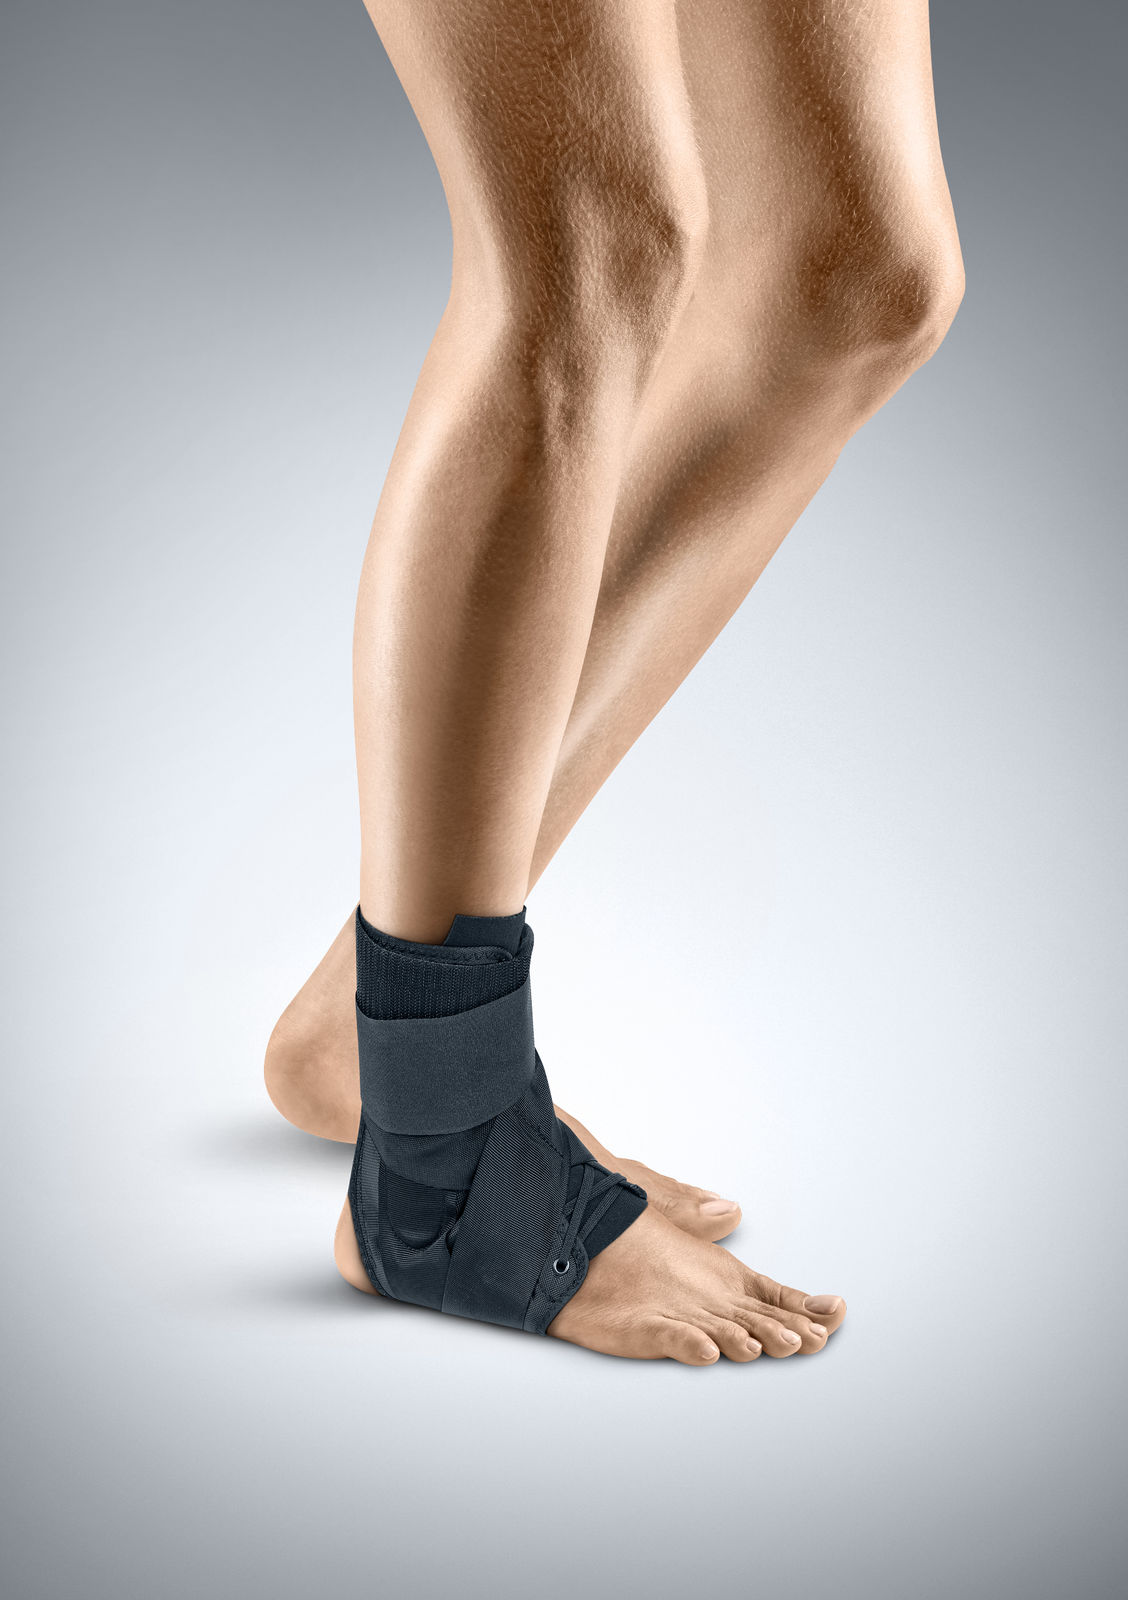 Buy Ankle Braces & Supporter Online in Canada